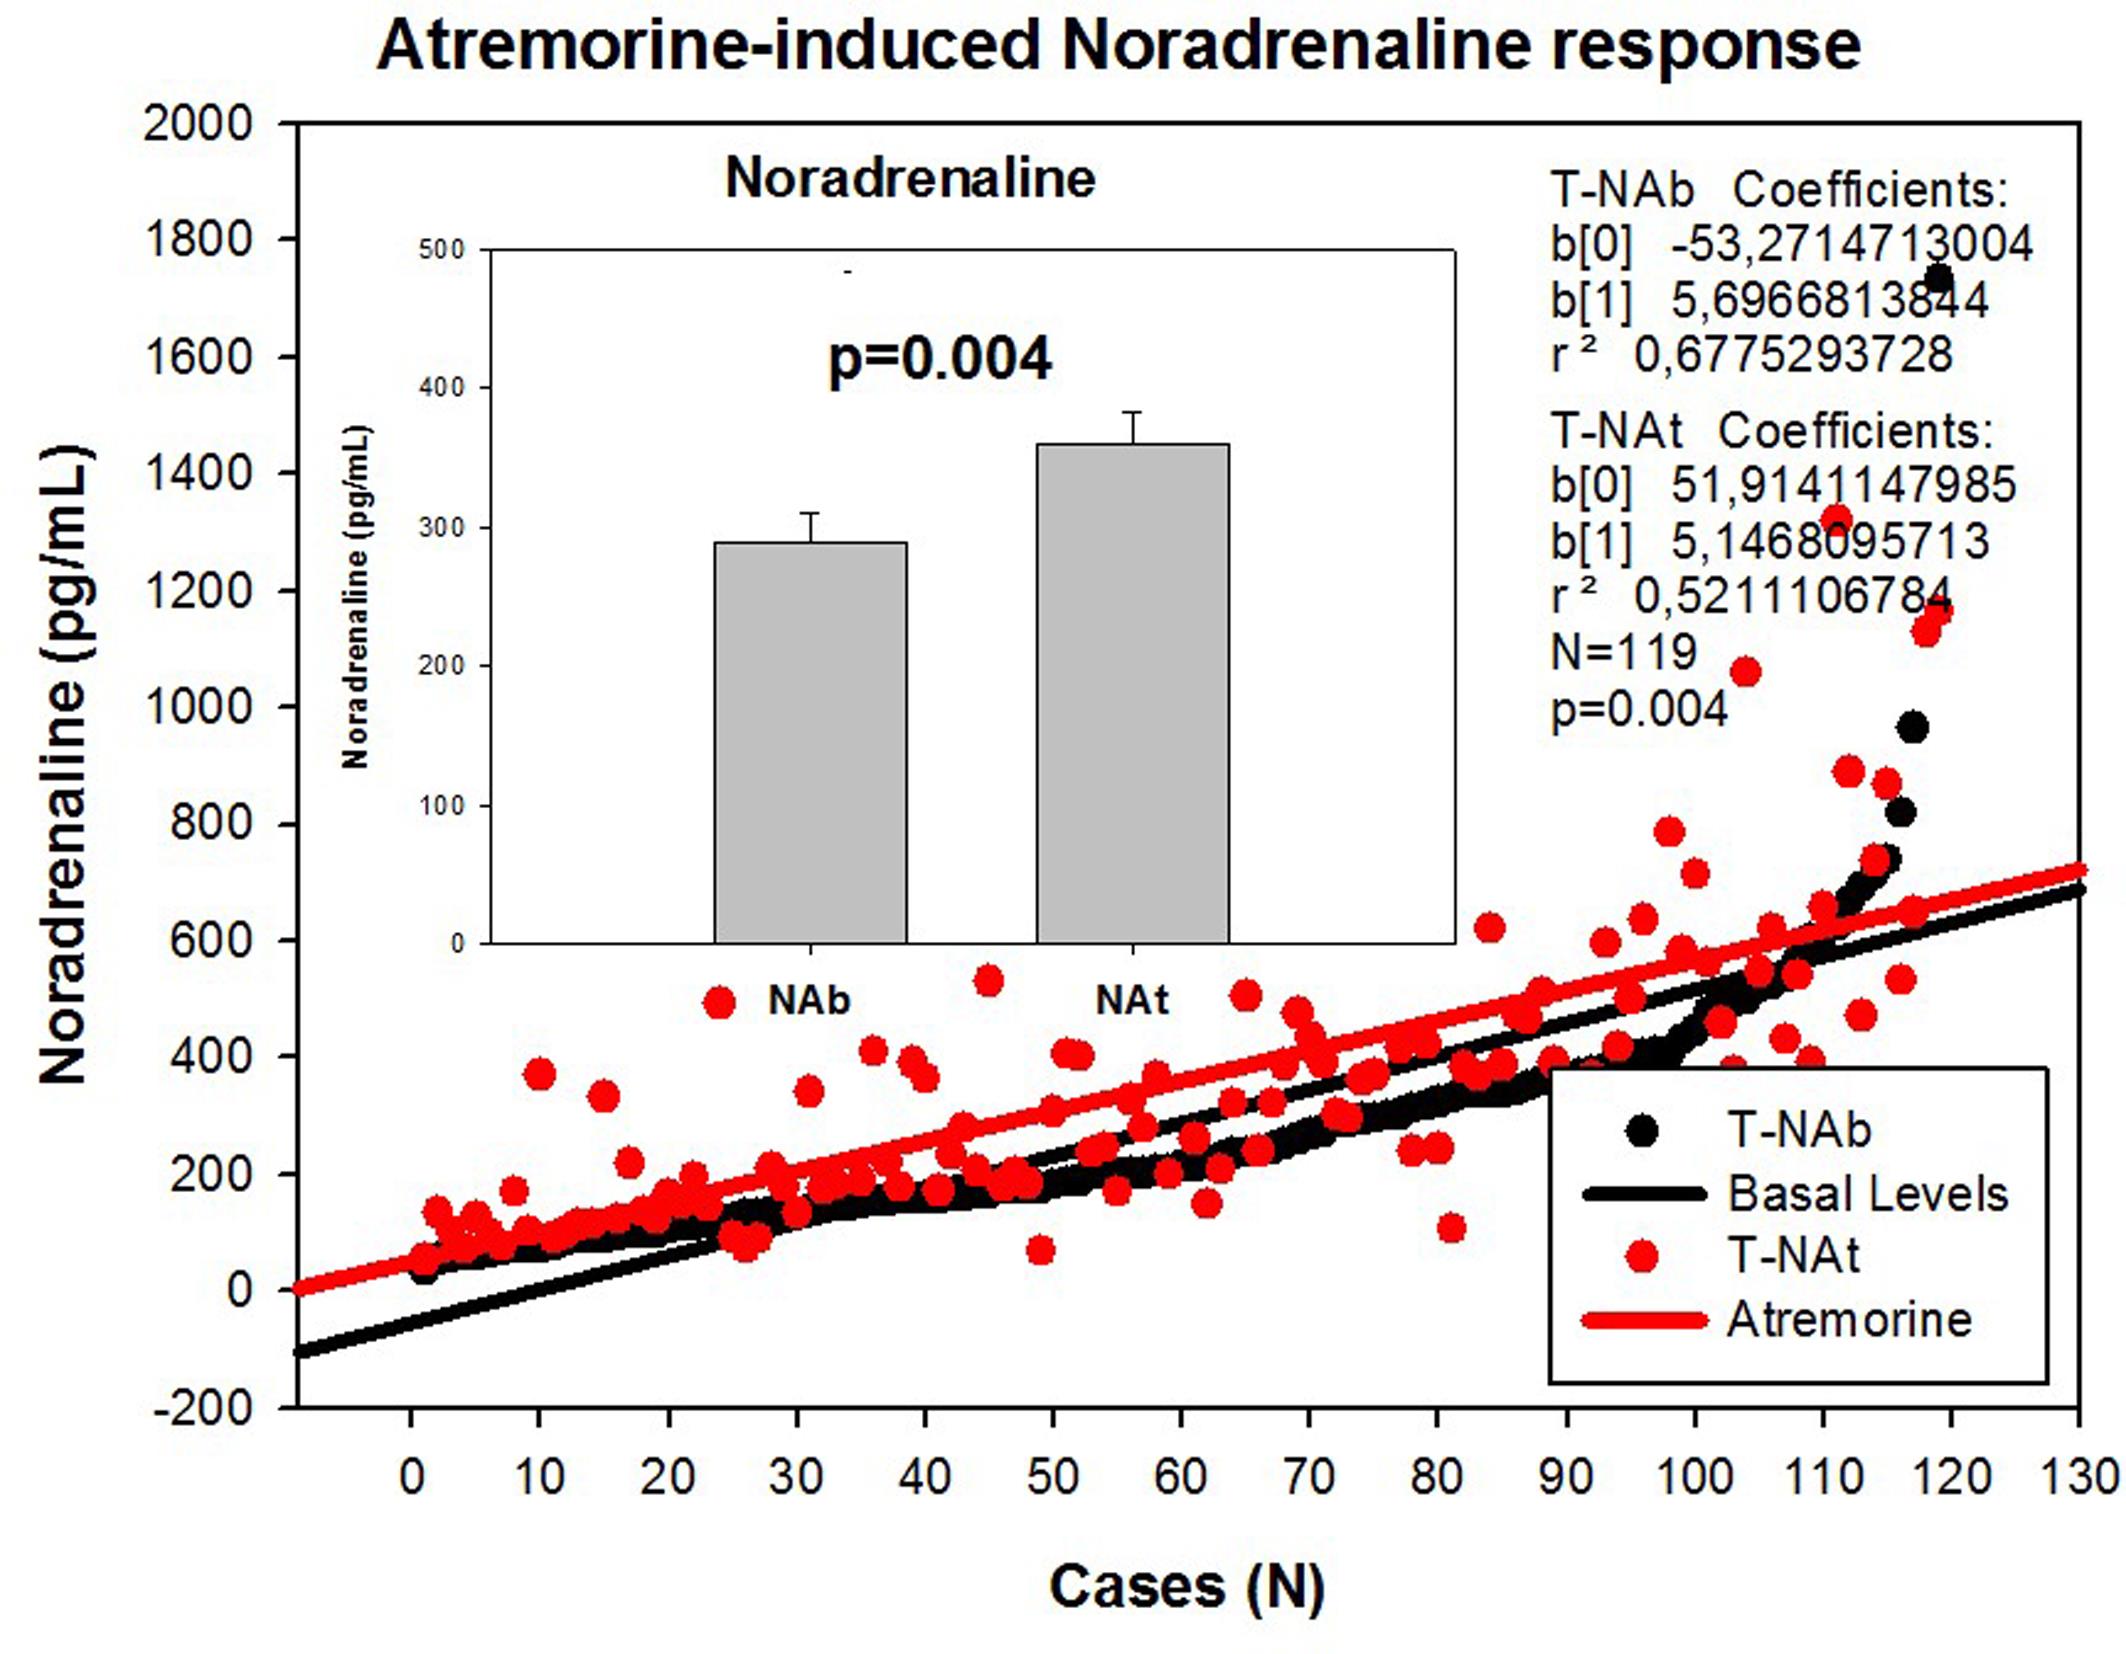 Atremorine-induced noradrenaline (NA) response in patients with Parkinsonian disorders.